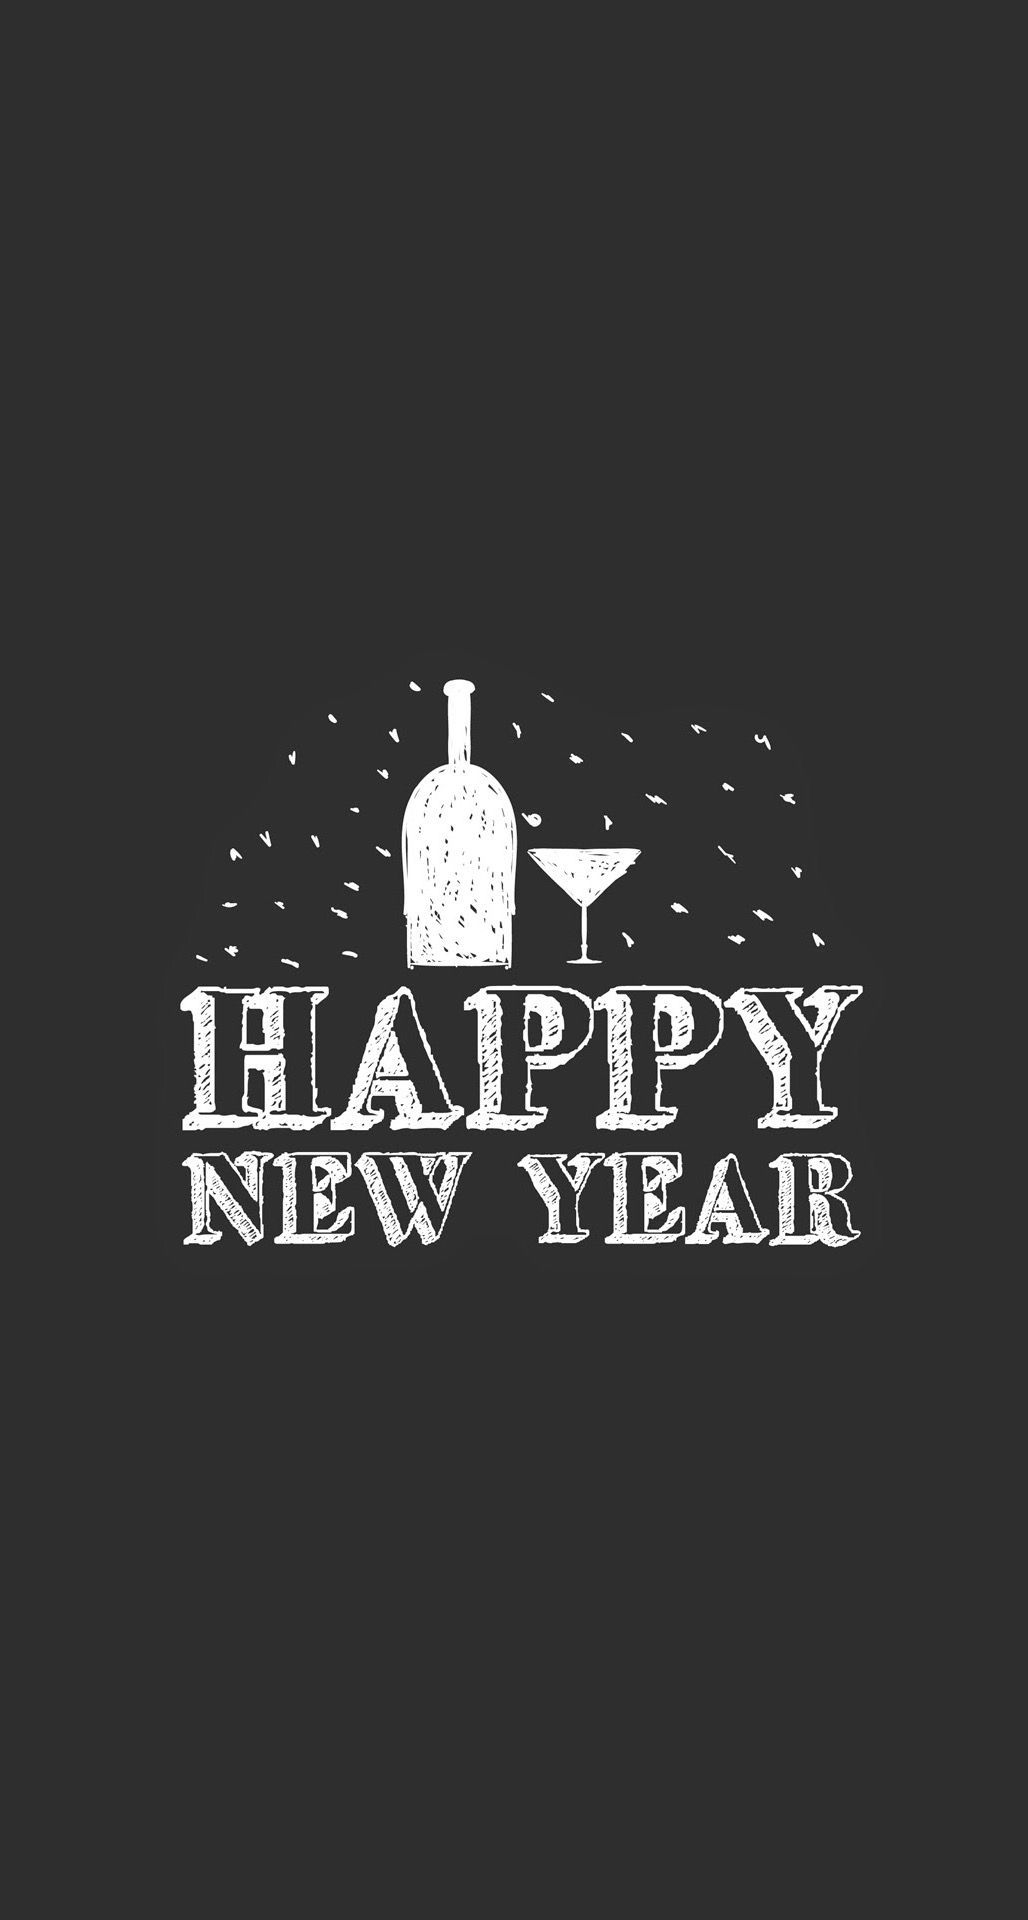 Happy New Year Drinks Minimal iPhone 6 Plus HD Wallpaper. Happy new year wallpaper, Wallpaper iphone christmas, New year's drinks